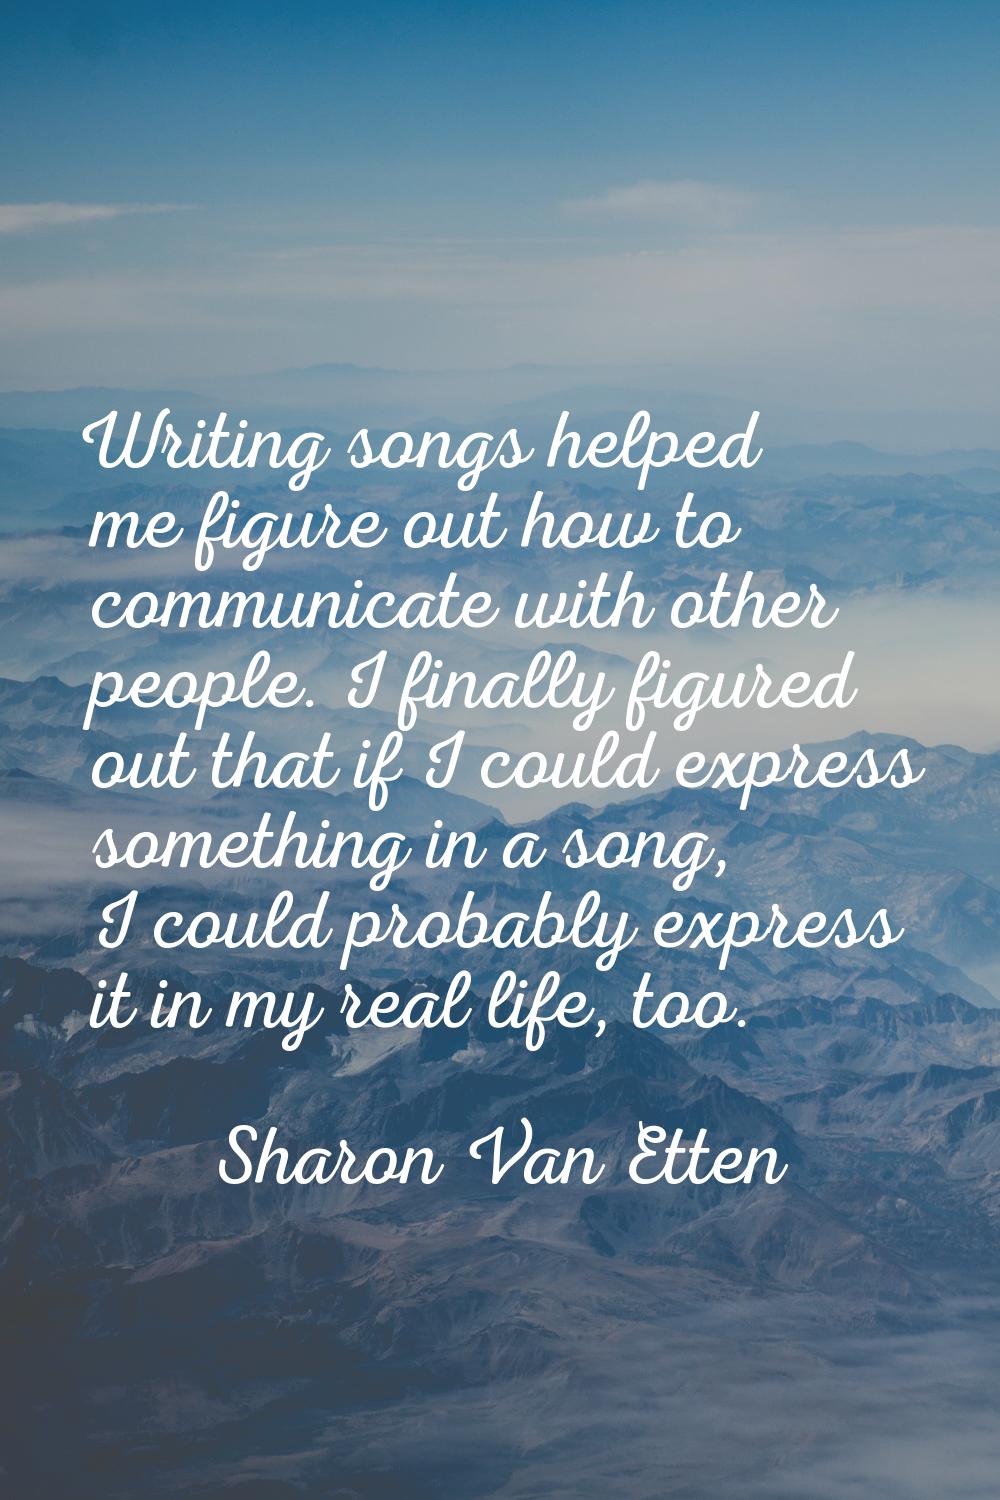 Writing songs helped me figure out how to communicate with other people. I finally figured out that